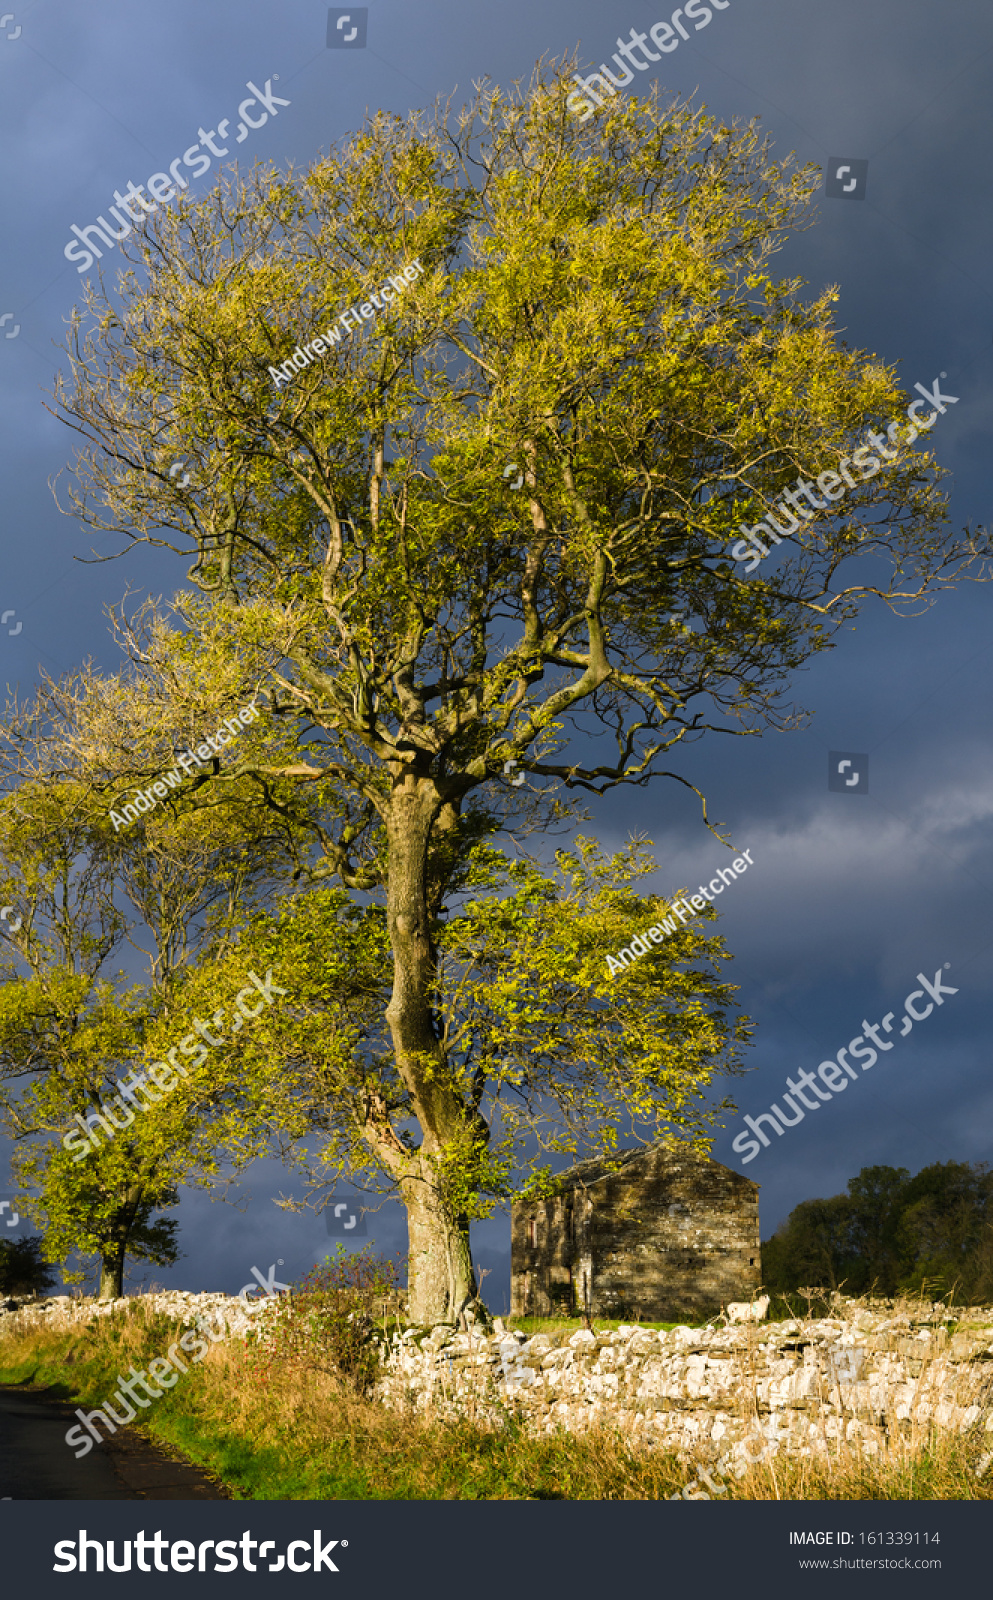 Sunlight on a dales Ash tree #161339114